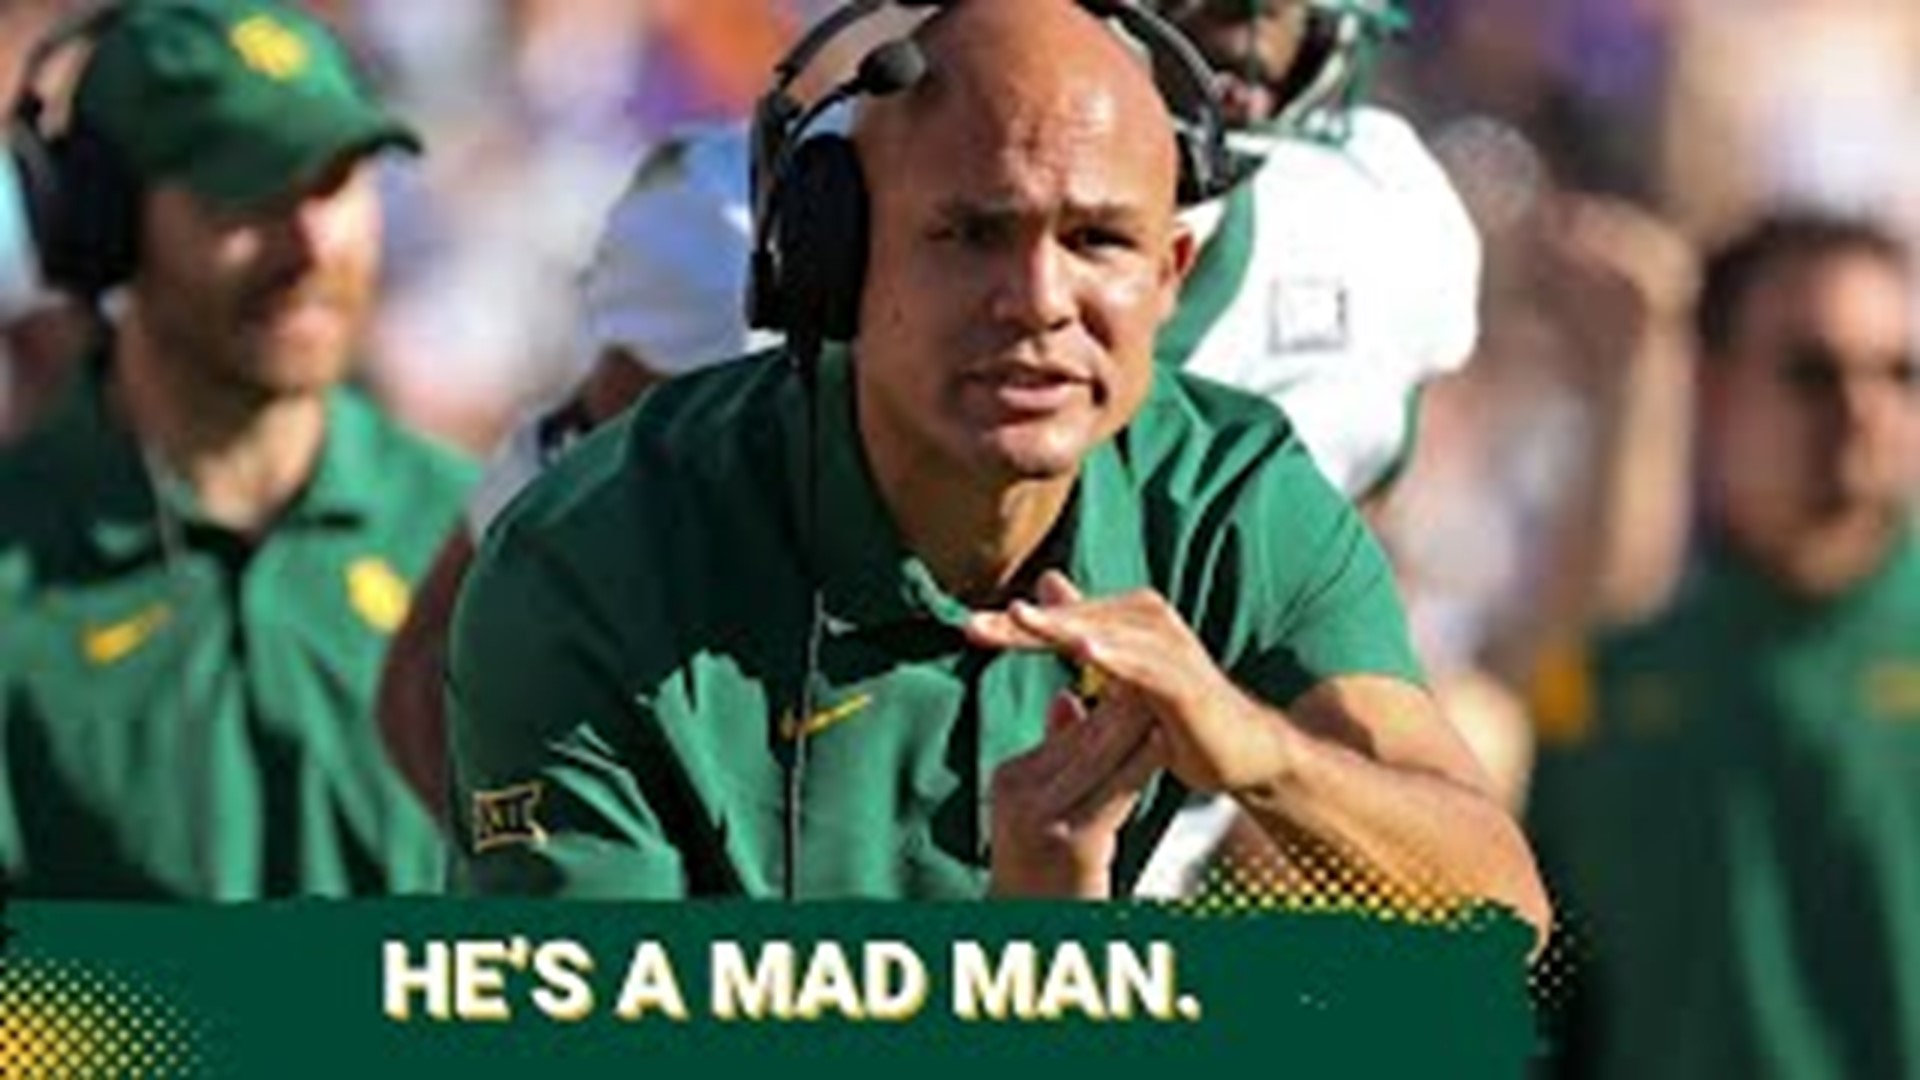 Baylor head coach and new defensive play caller Dave Aranda says he is "pissed off" more now as he takes more of a hands-on approach with the defense.